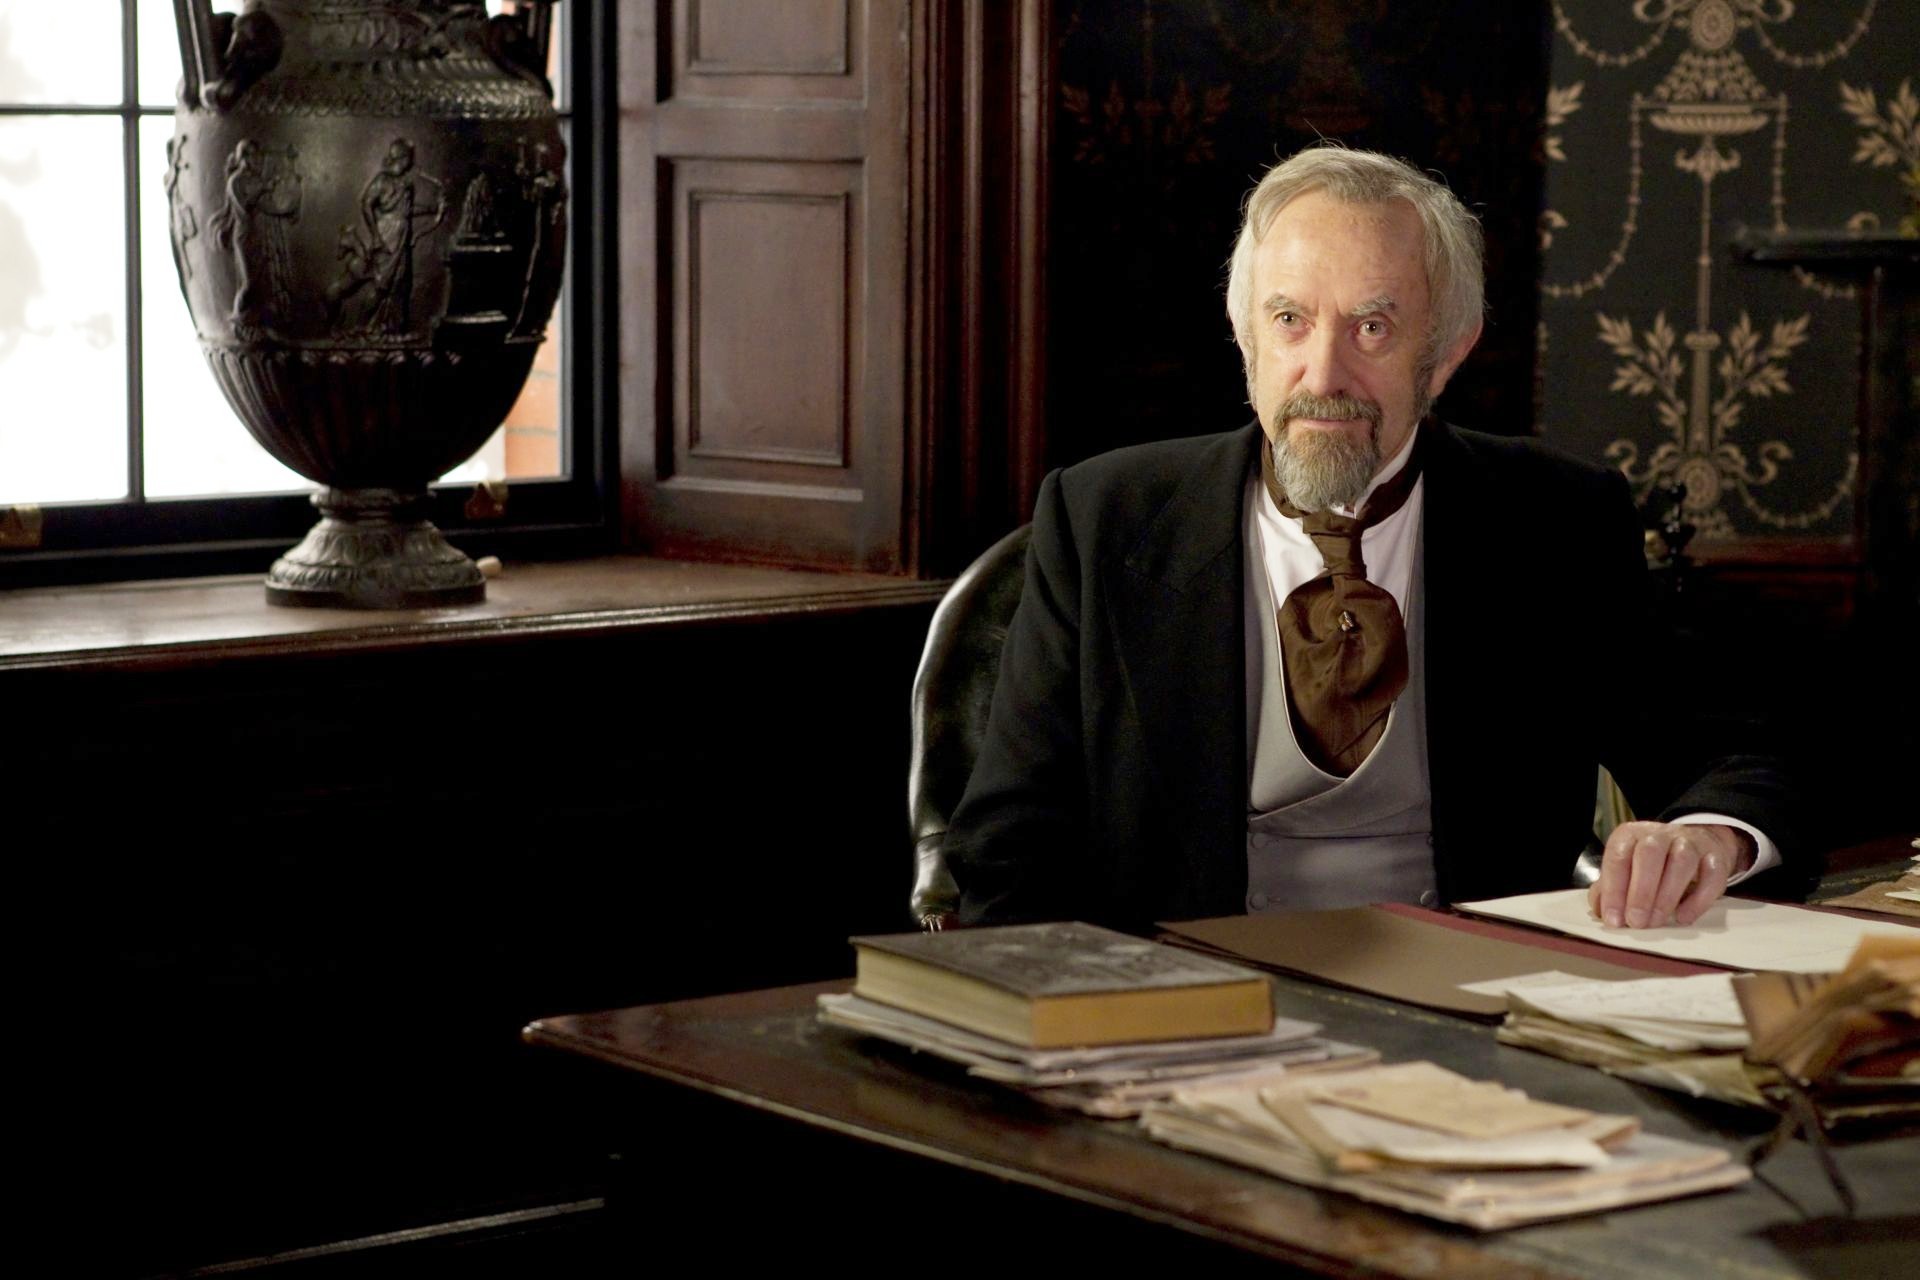 Jonathan Pryce stars as Dr. Dalrymple in Sony Pictures Classics' Hysteria (2012). Photo credit by Ricardo Vaz Palma.